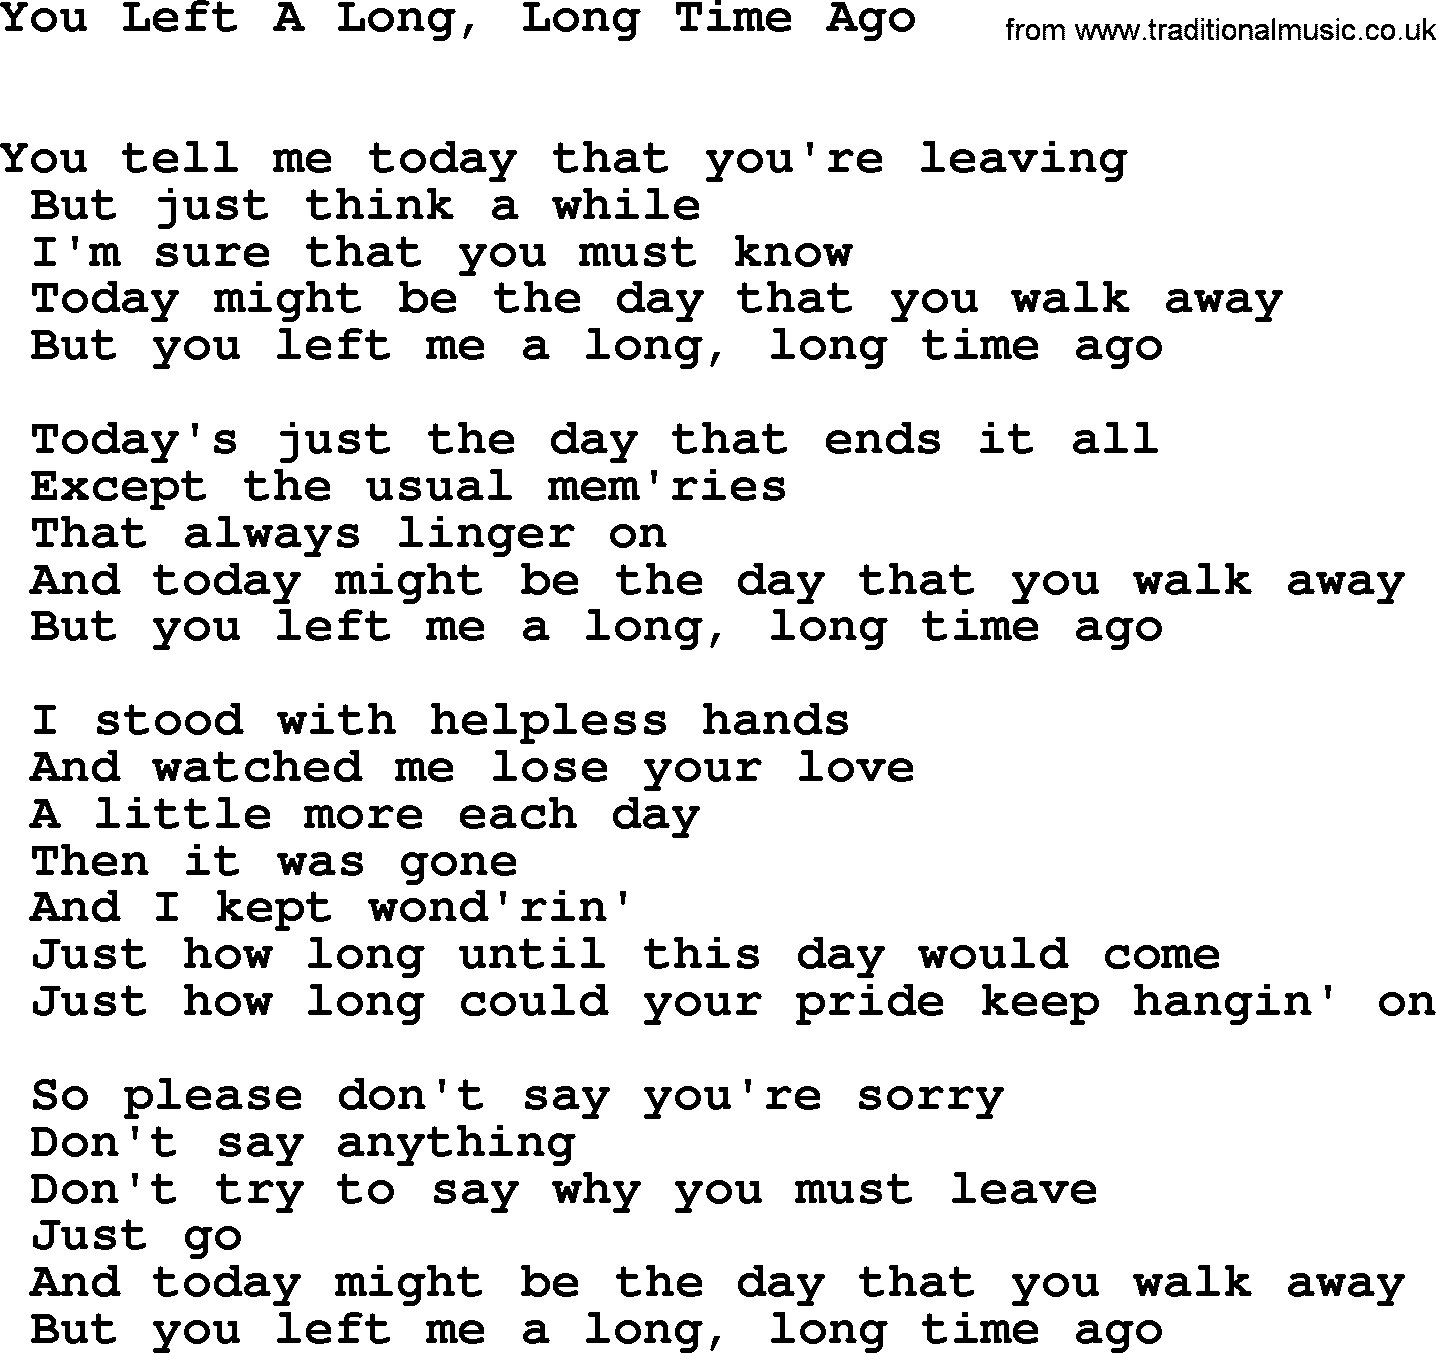 Willie Nelson song: You Left A Long, Long Time Ago lyrics